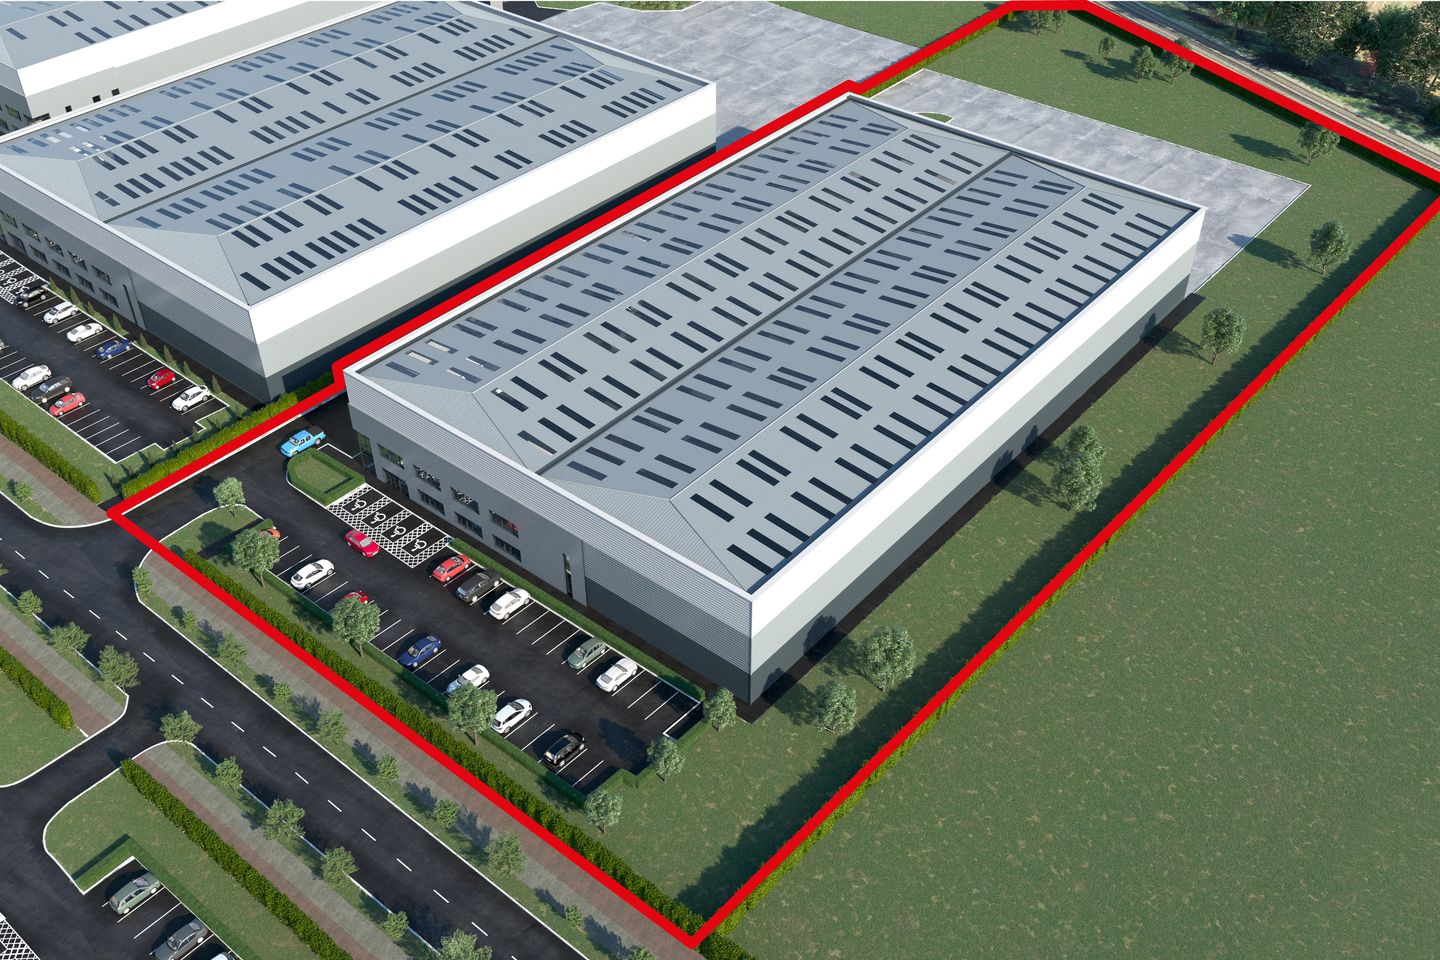 Unit 10, Dundalk North Business Park, Armagh road, Dundalk, Co. Louth